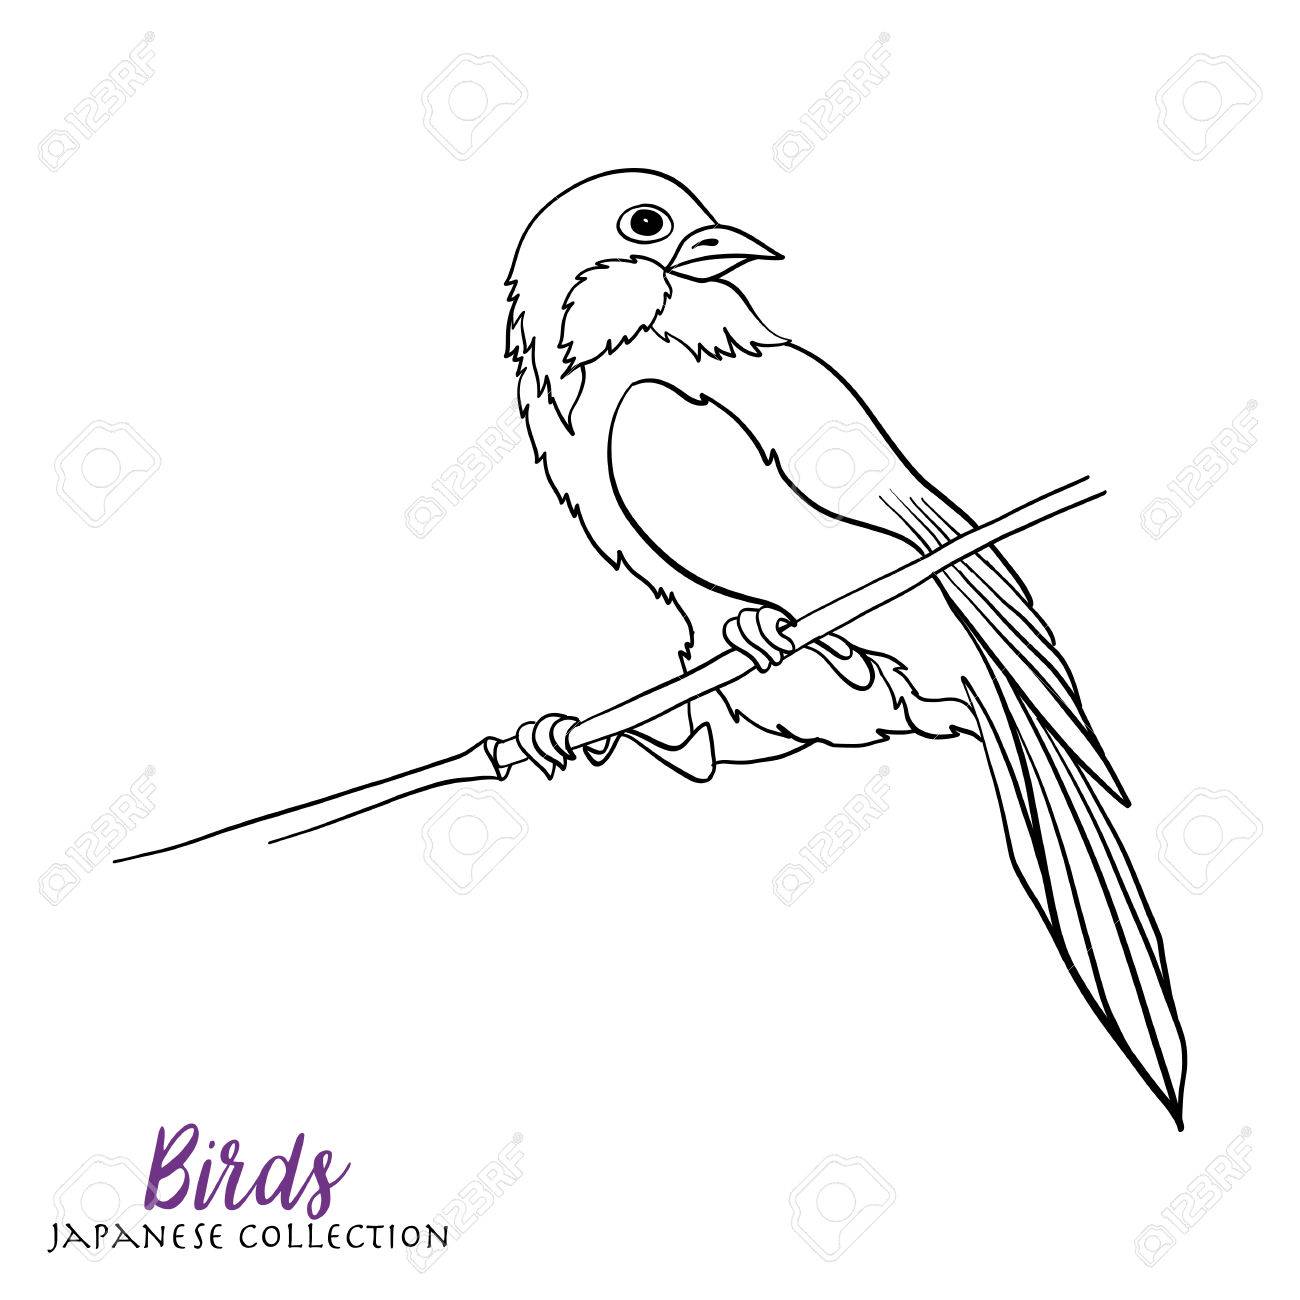 Japanese Bird Drawing at GetDrawings.com | Free for personal use